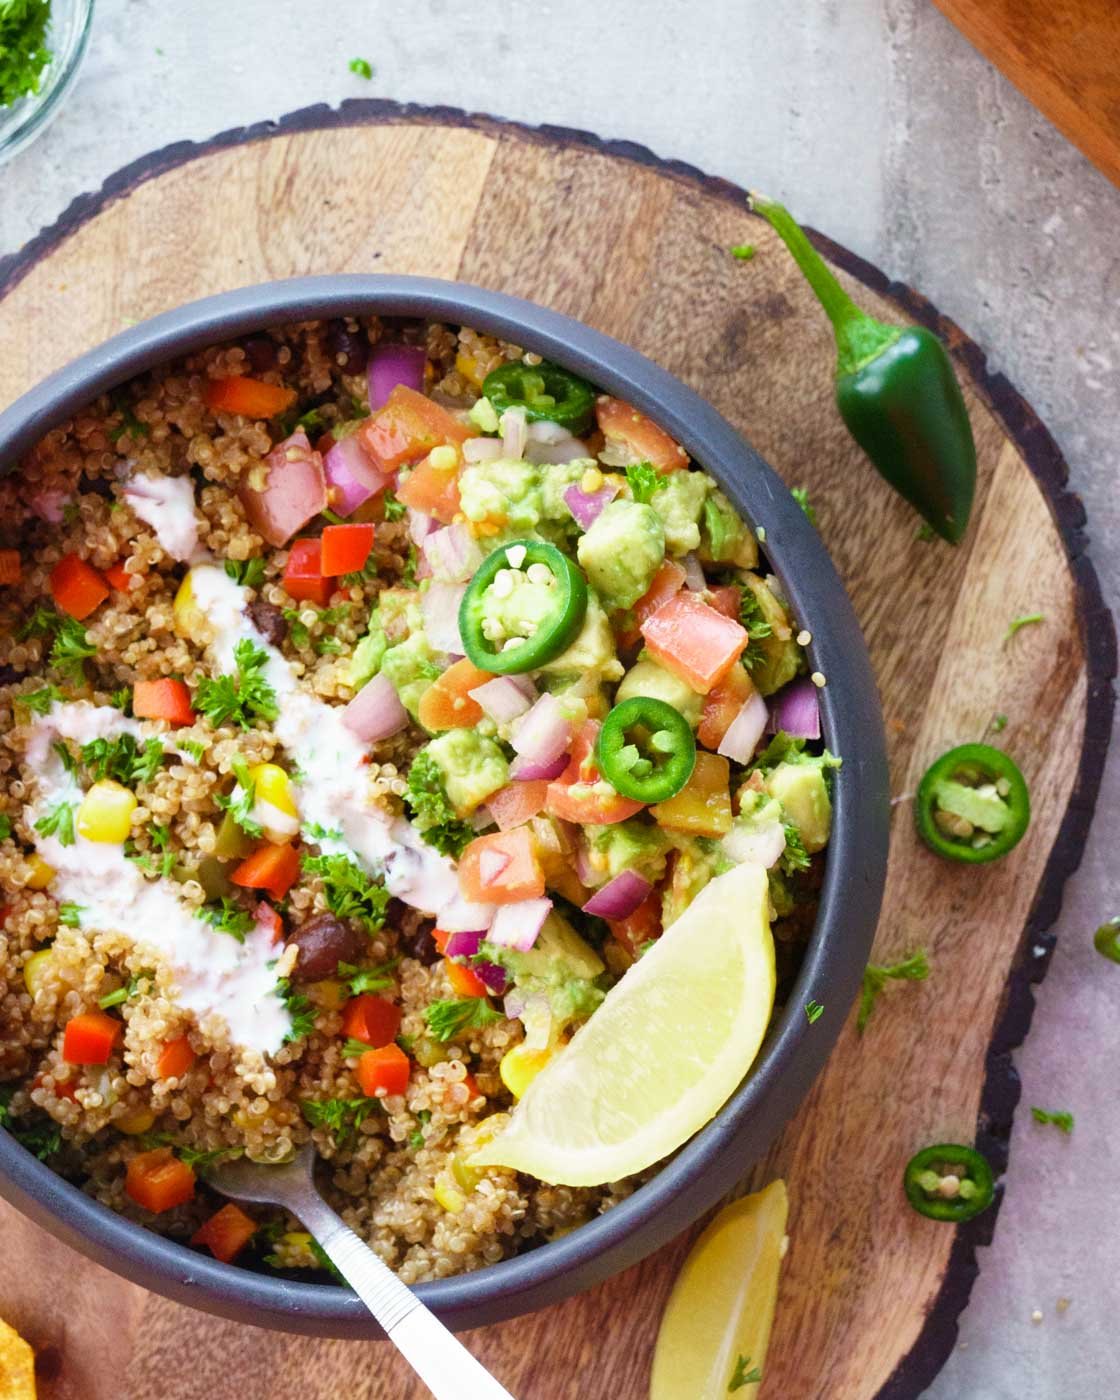 https://www.yellowthyme.com/wp-content/uploads/2020/05/instant-pot-mexican-Quinoa-07628.jpg